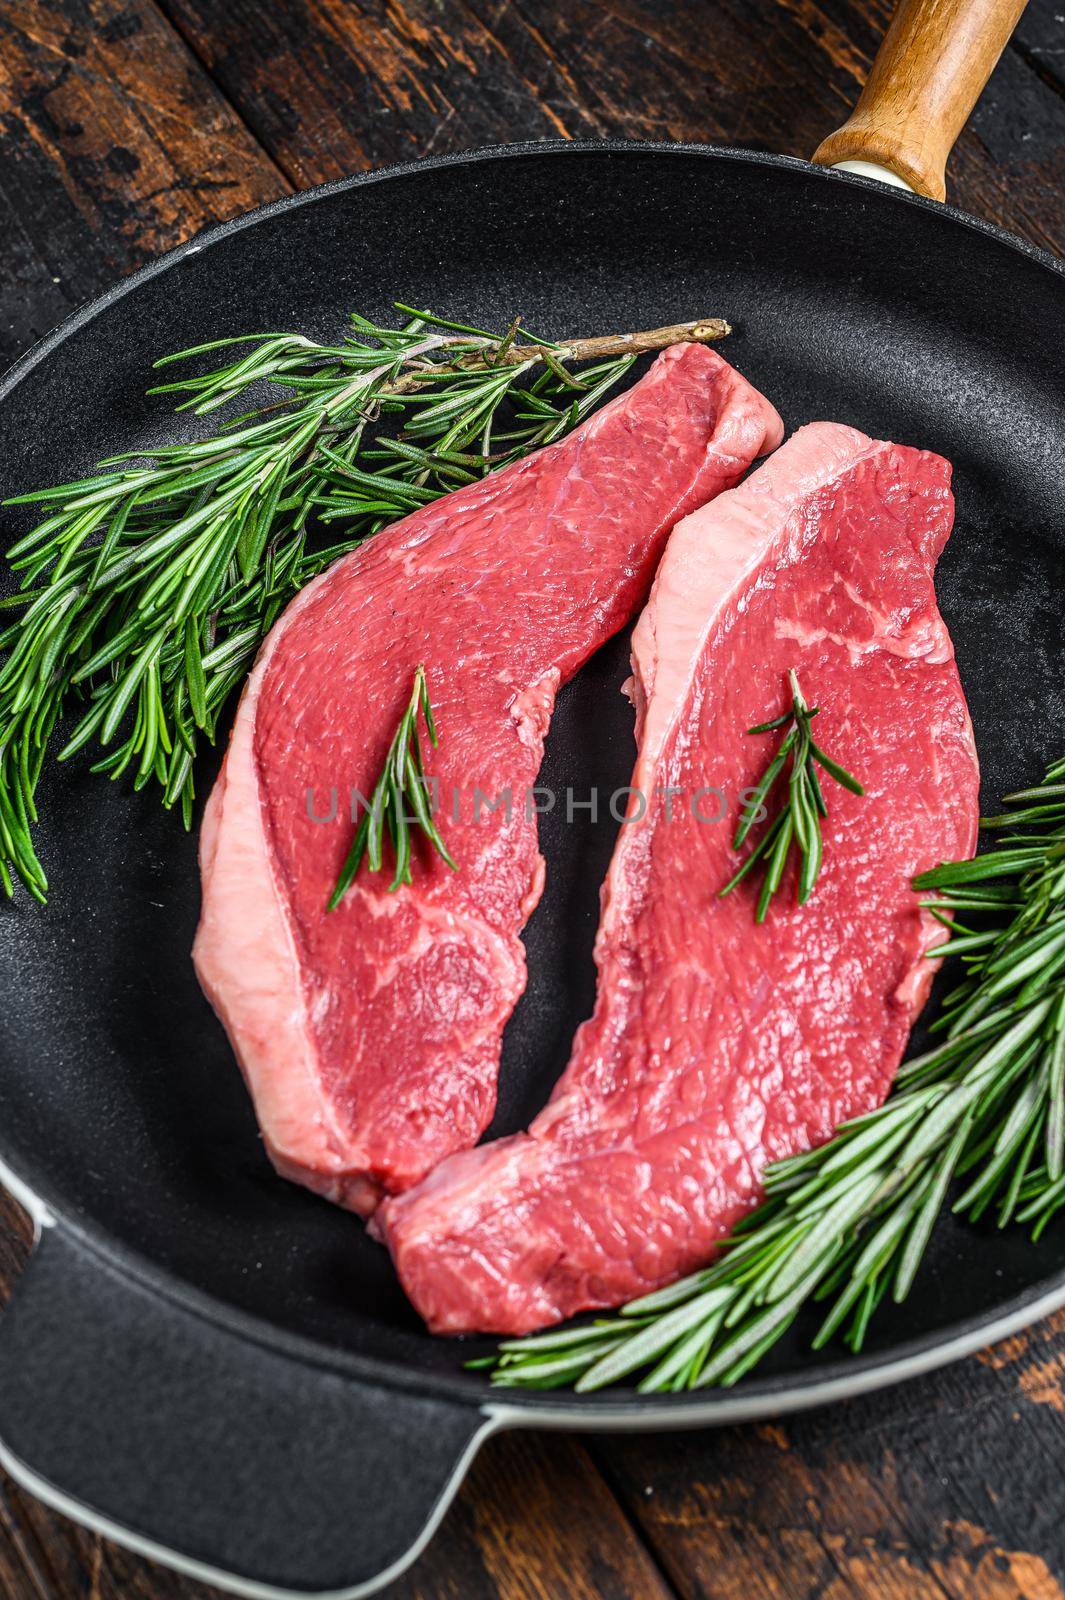 Raw beef meat rump steak in a pan. Dark wooden background. Top view by Composter